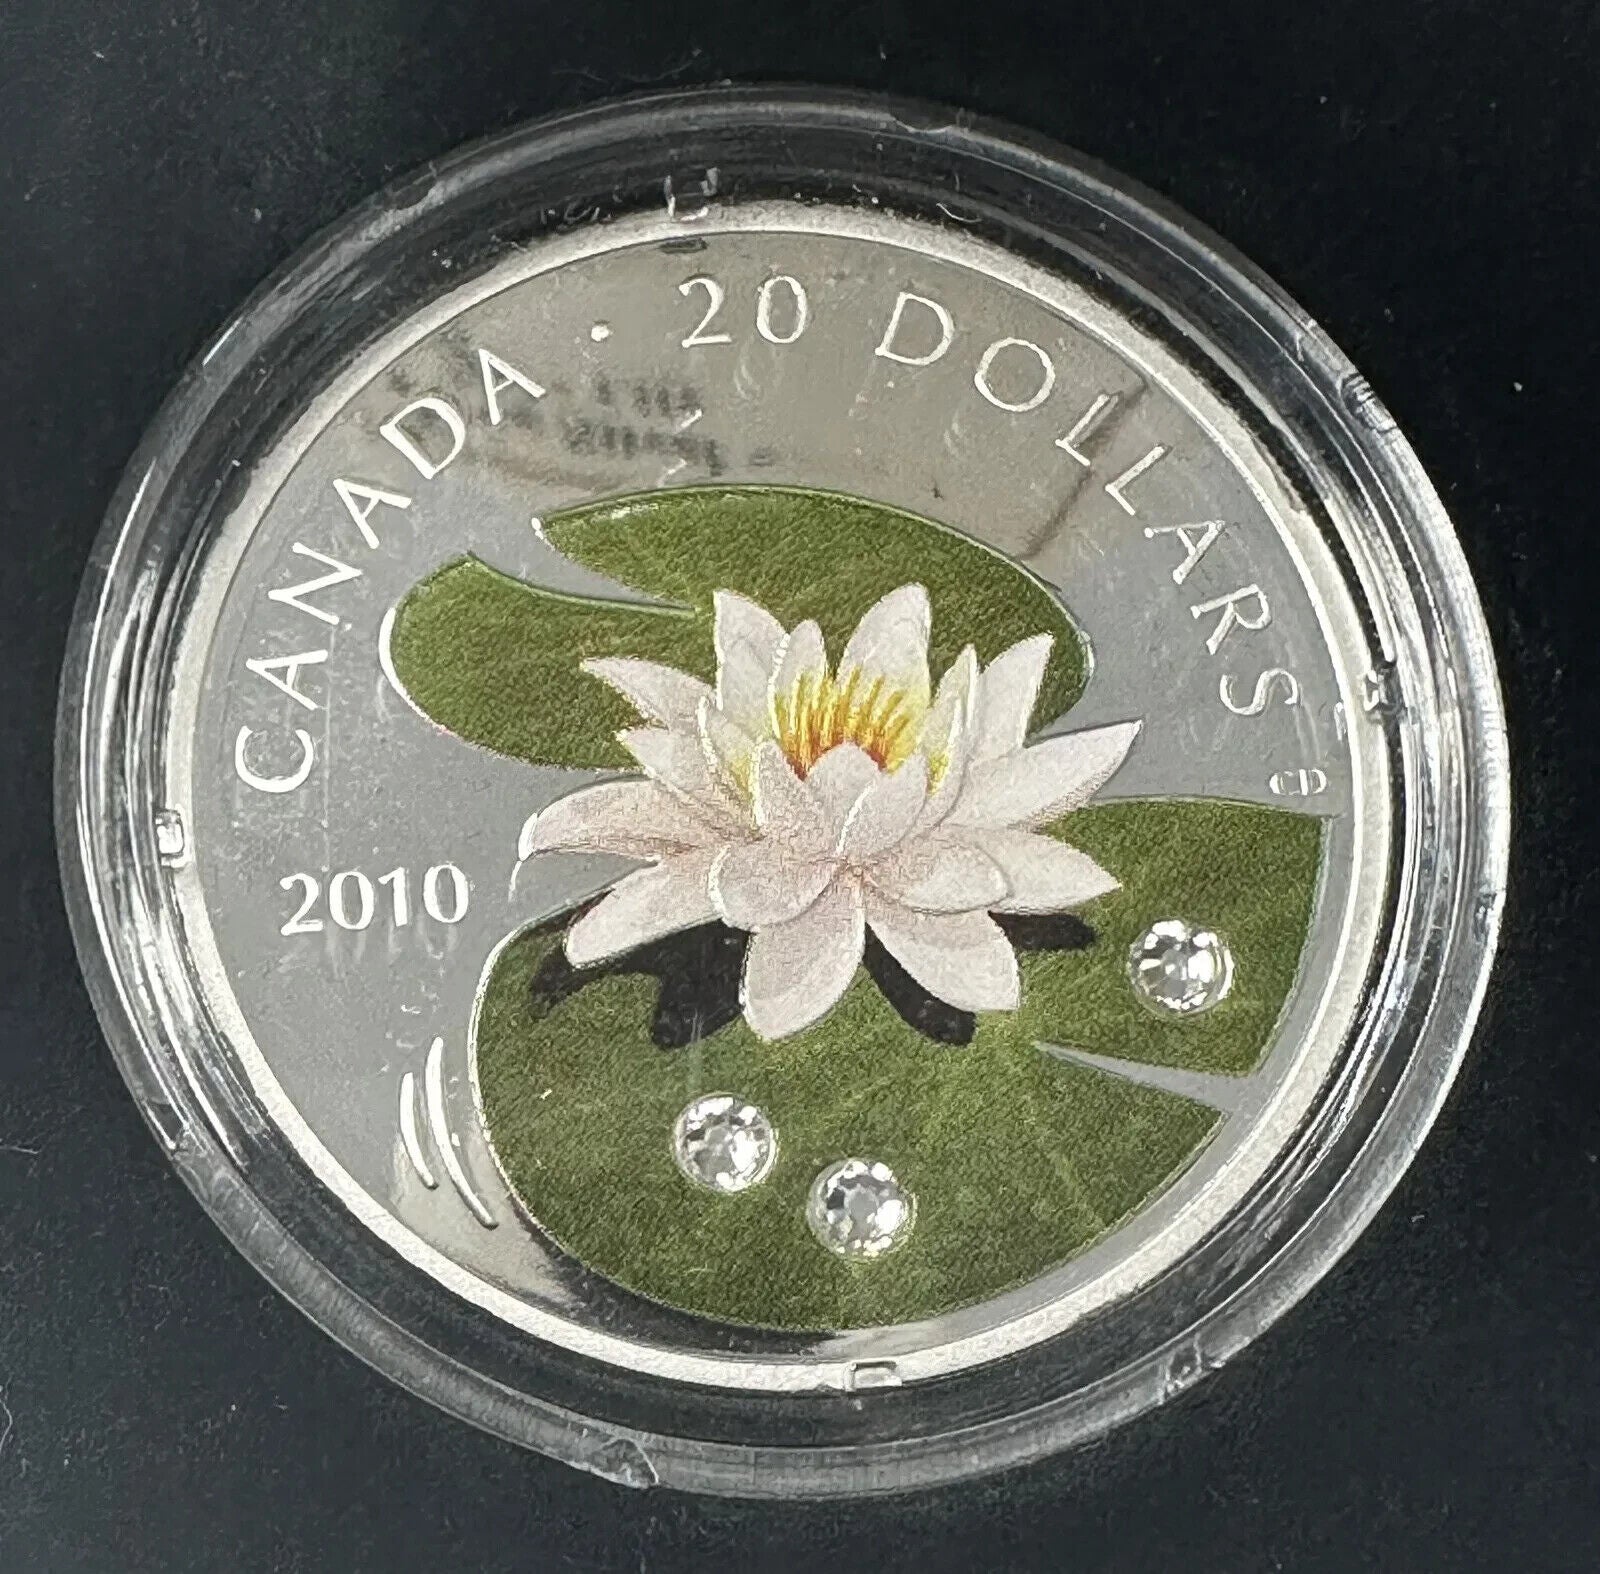 1 Oz Silver Coin 2010 Canada $20 Flowers Water Lily with Swarovski Crystals-classypw.com-3